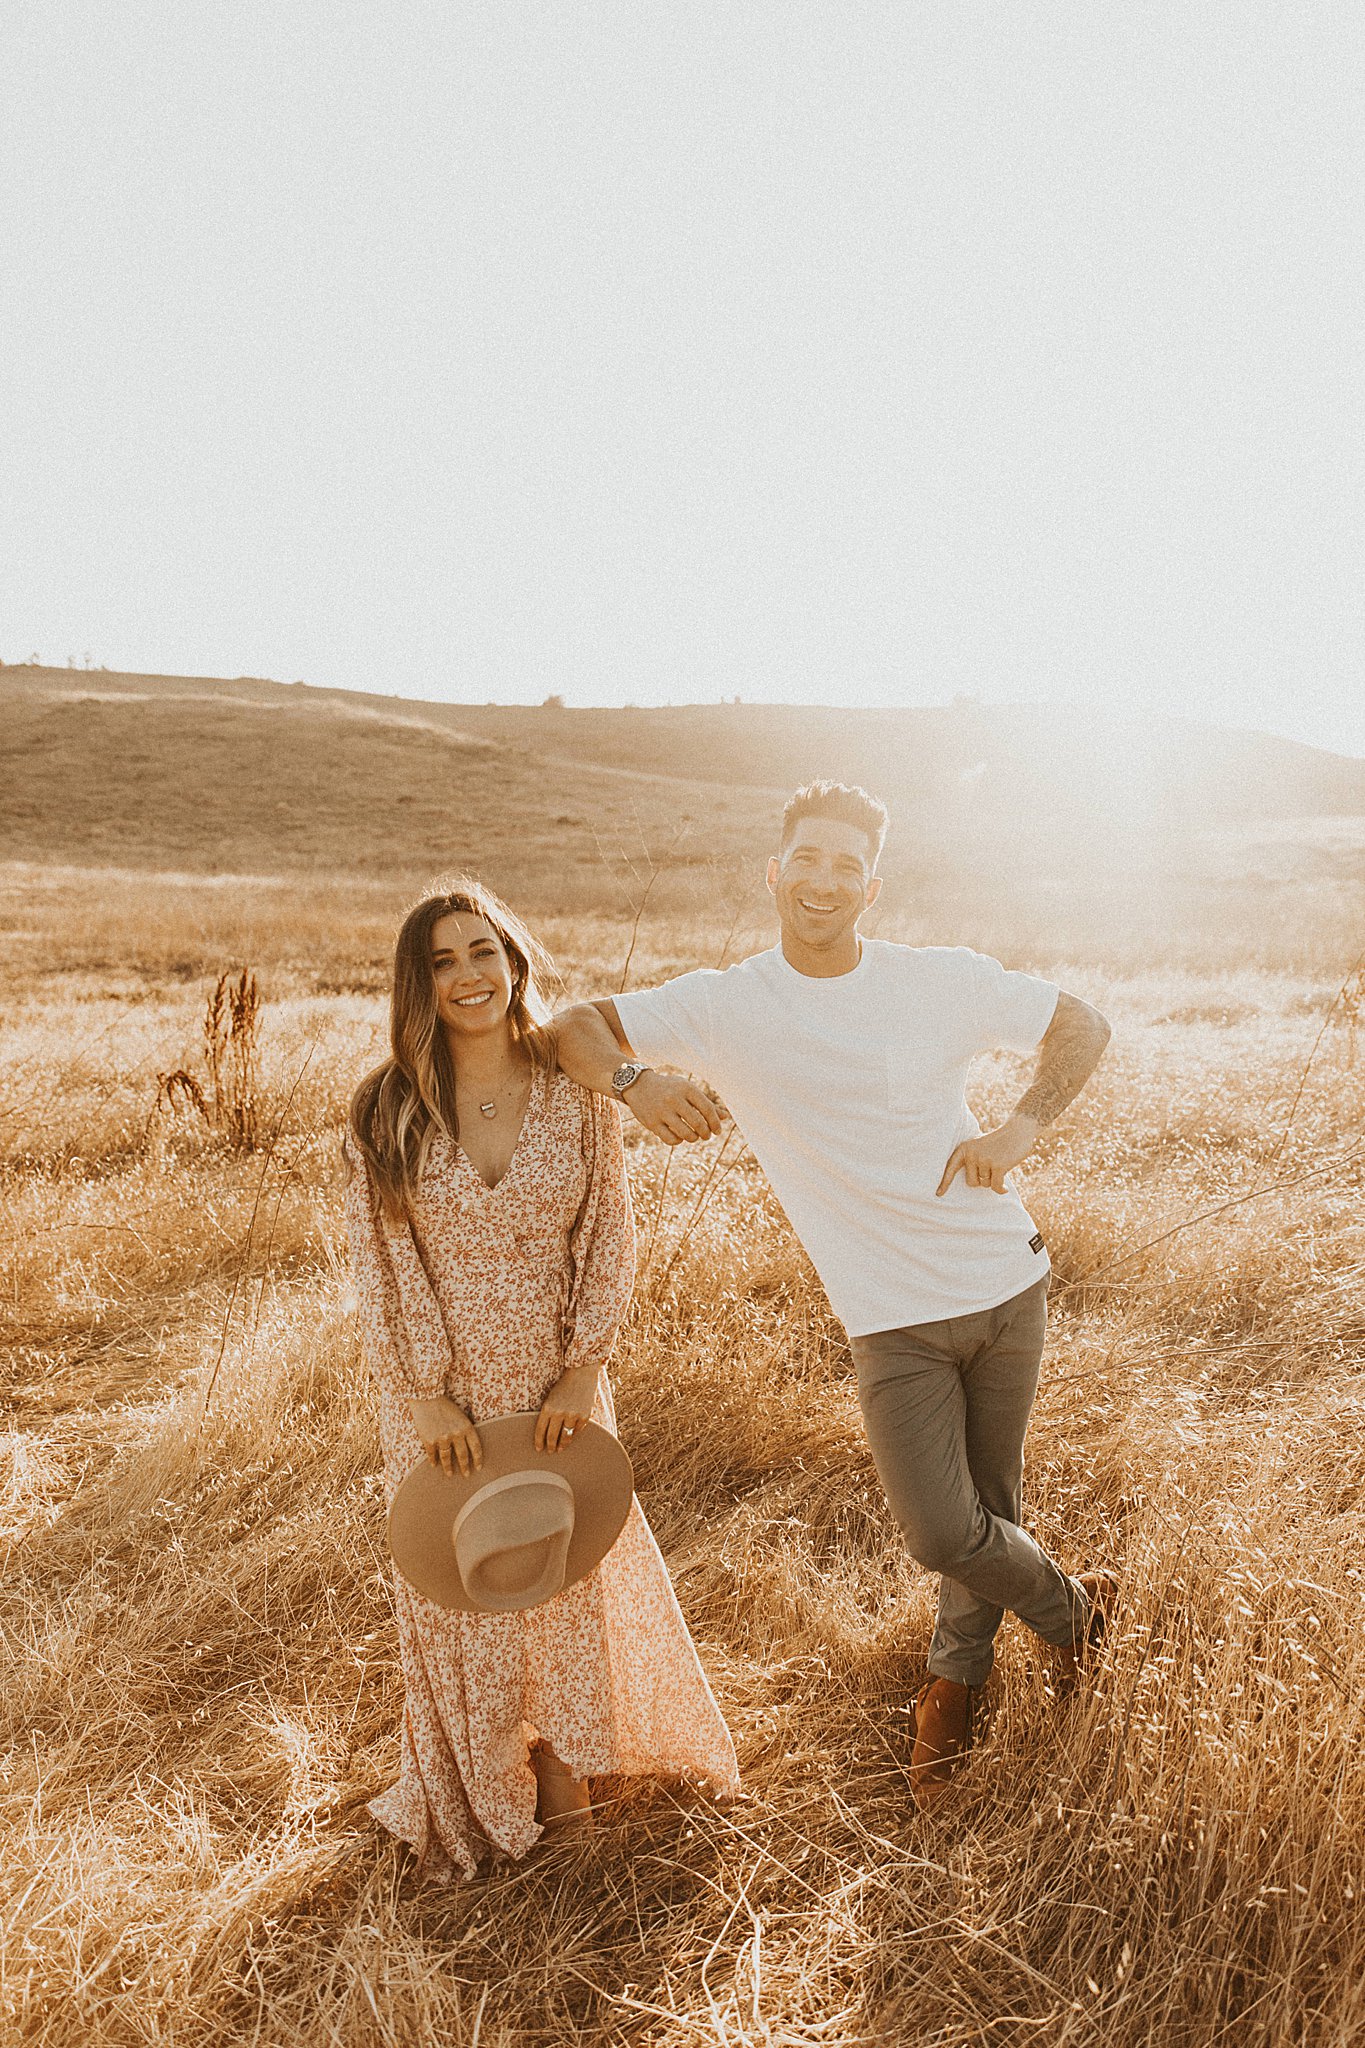 The Cutest Gender Reveal | Orange County Photographer ...